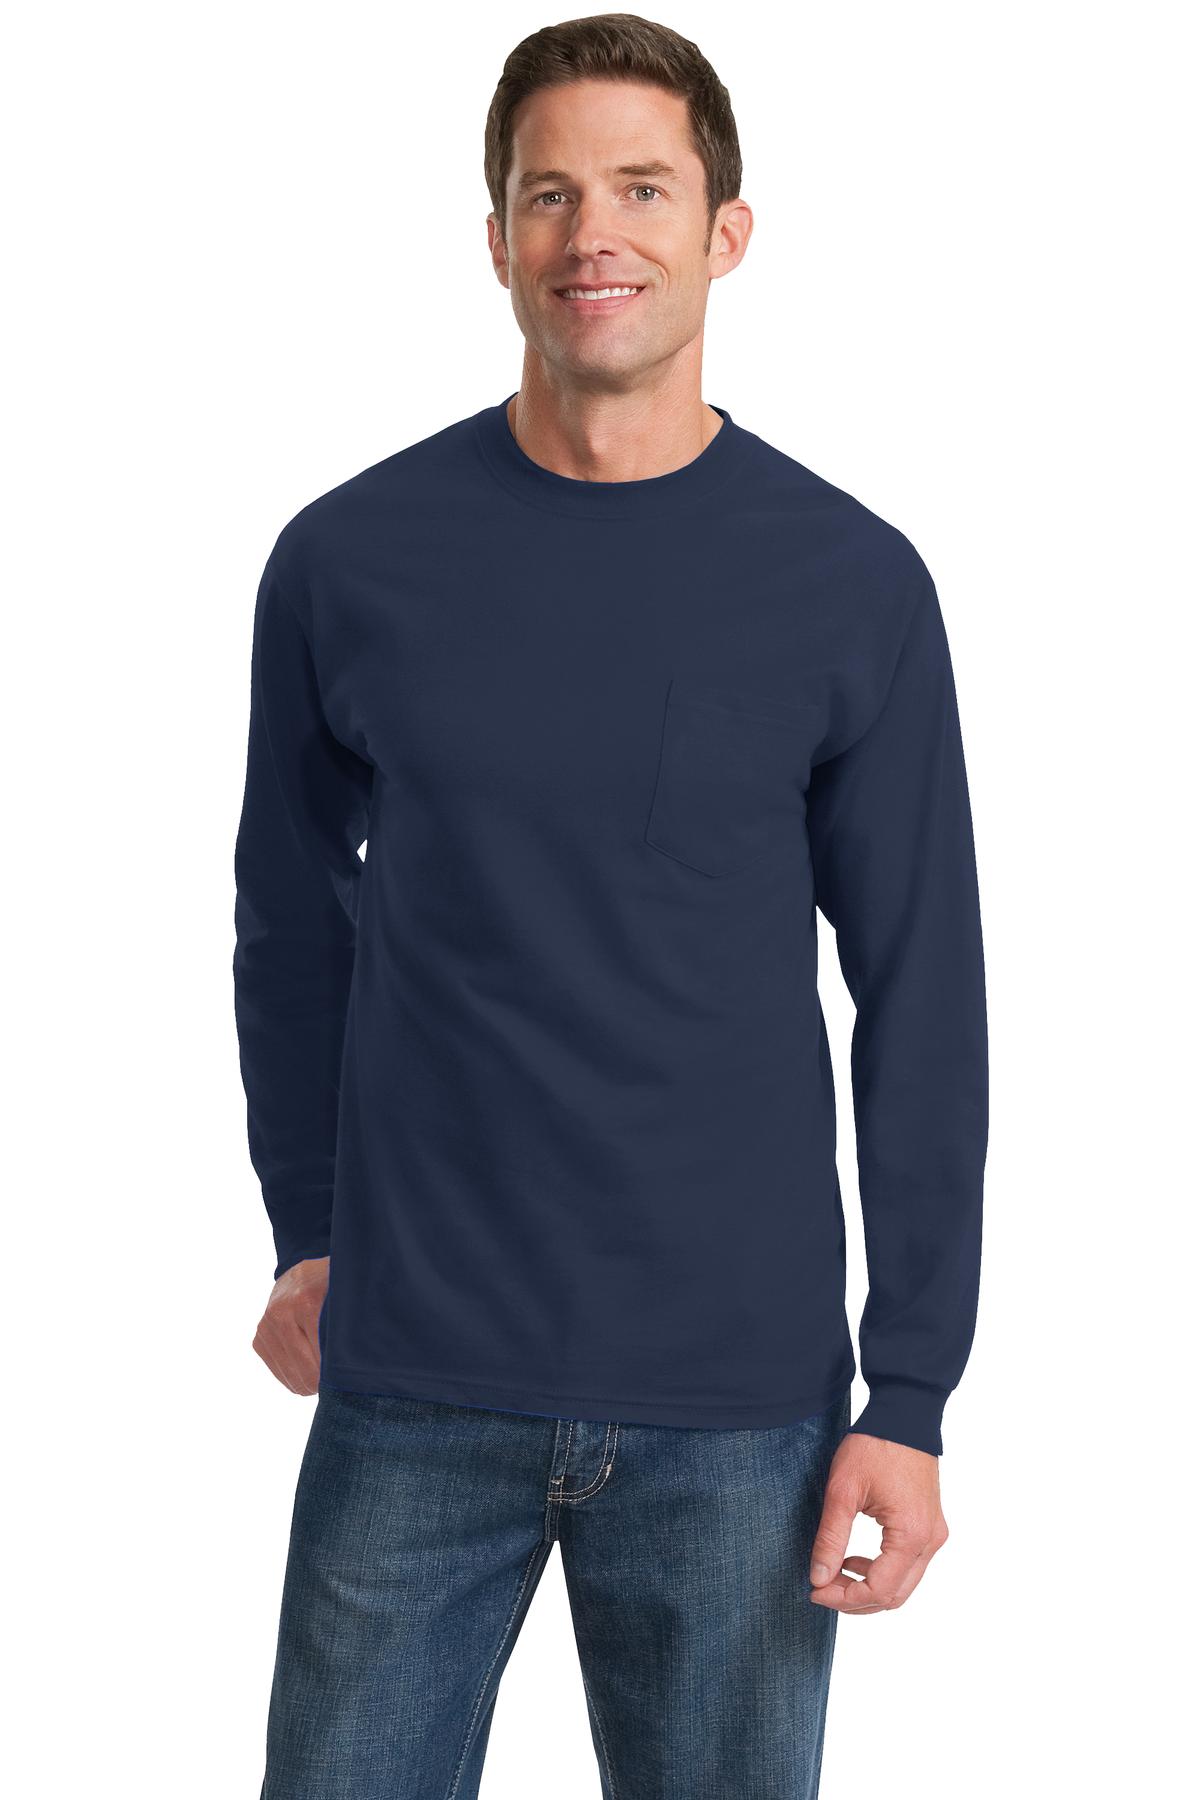 Port & Company® Tall Long Sleeve Essential Pocket Tee. PC61LSPT - DFW Impression